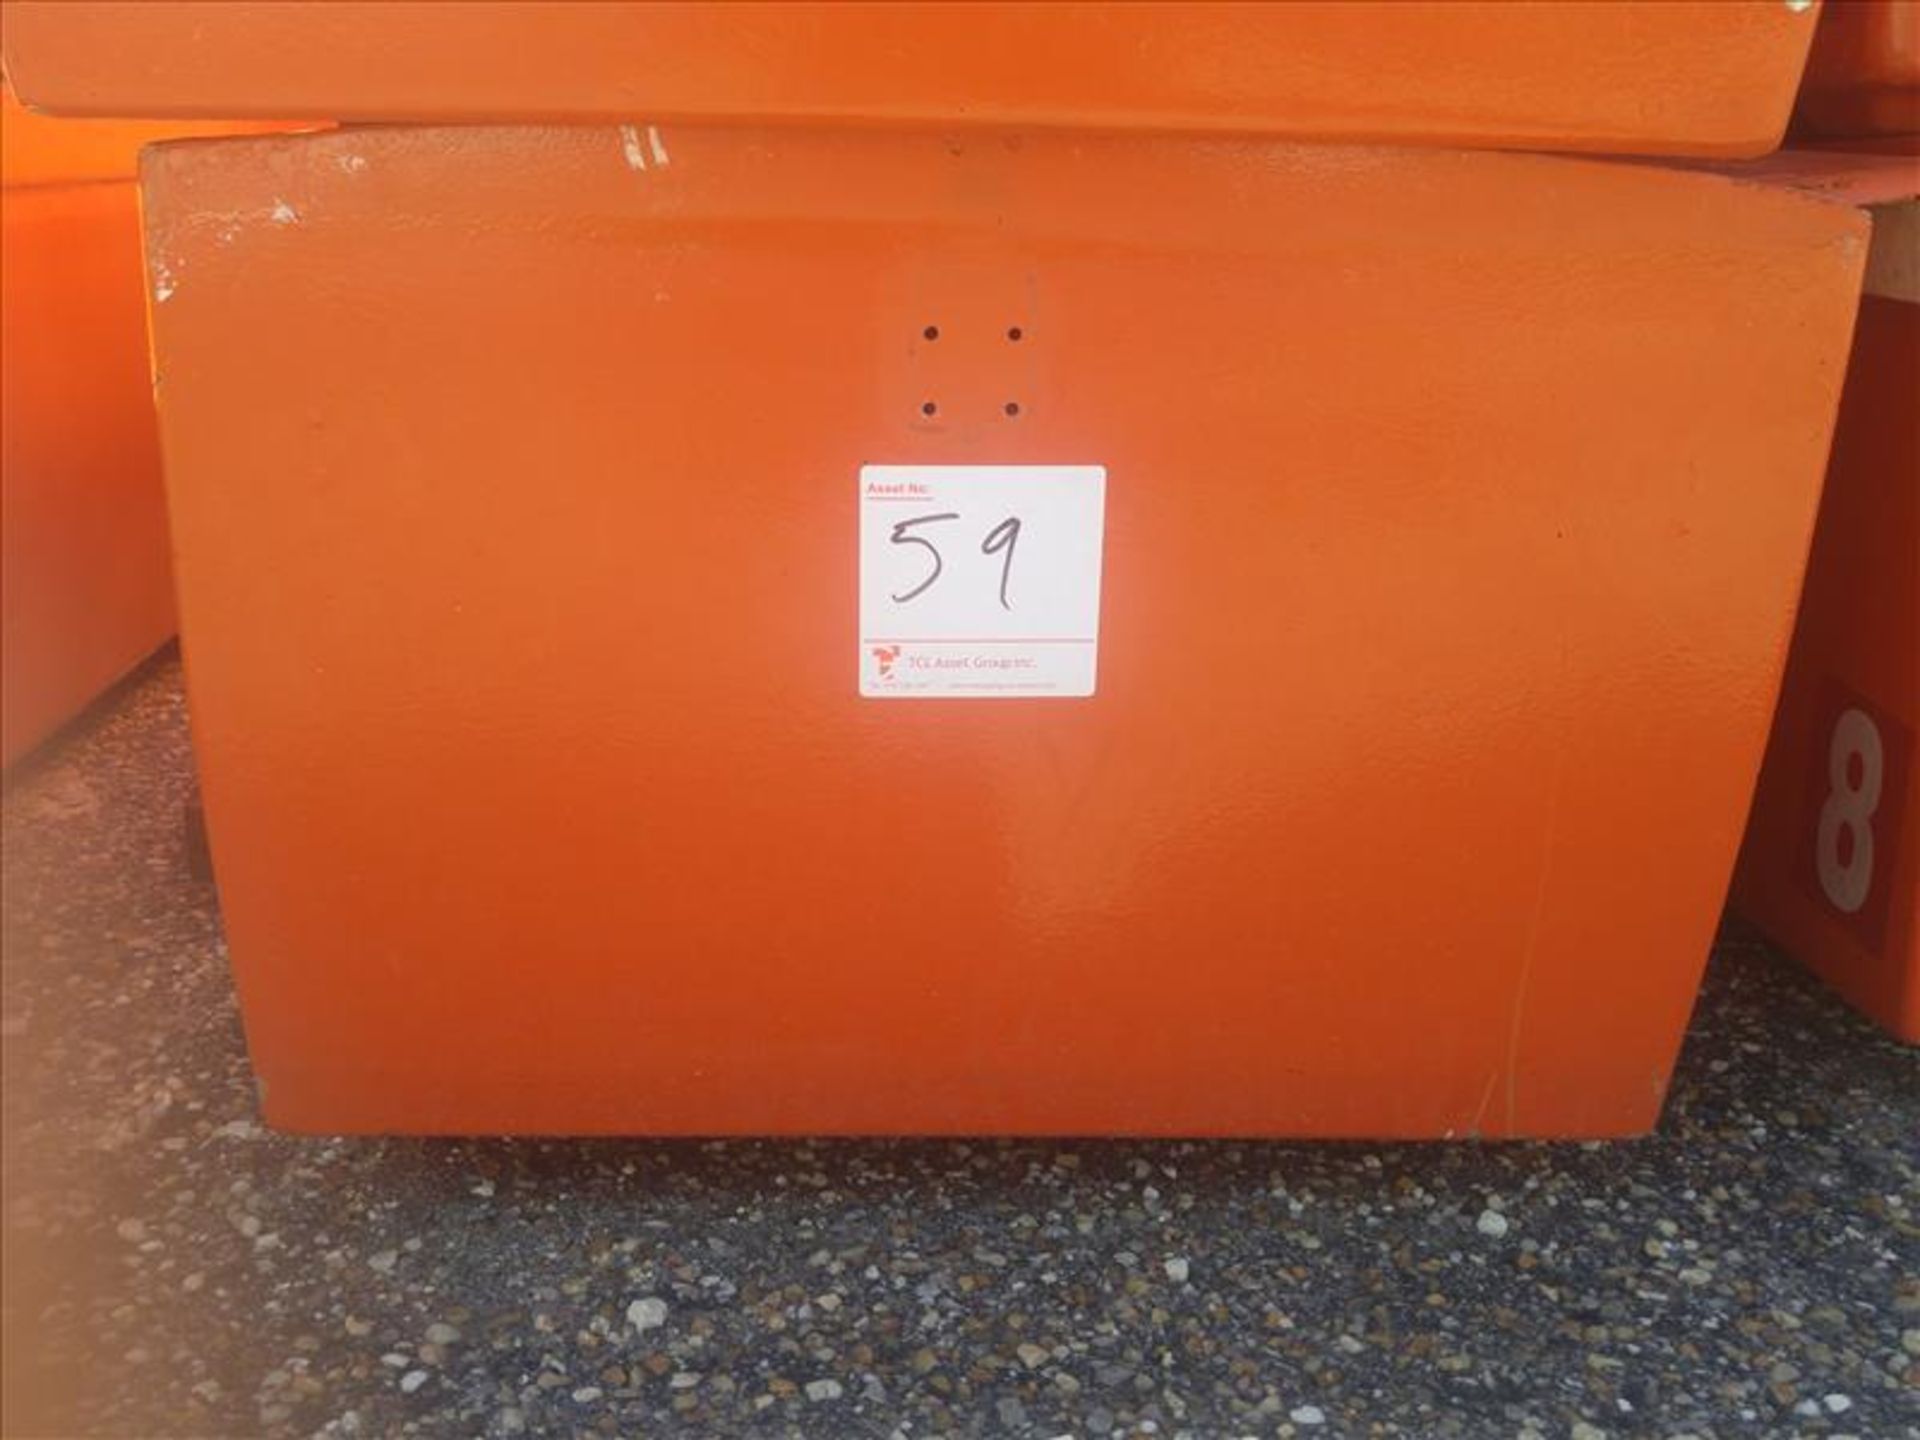 Large lifejacket container with approx. 24 lifejackets